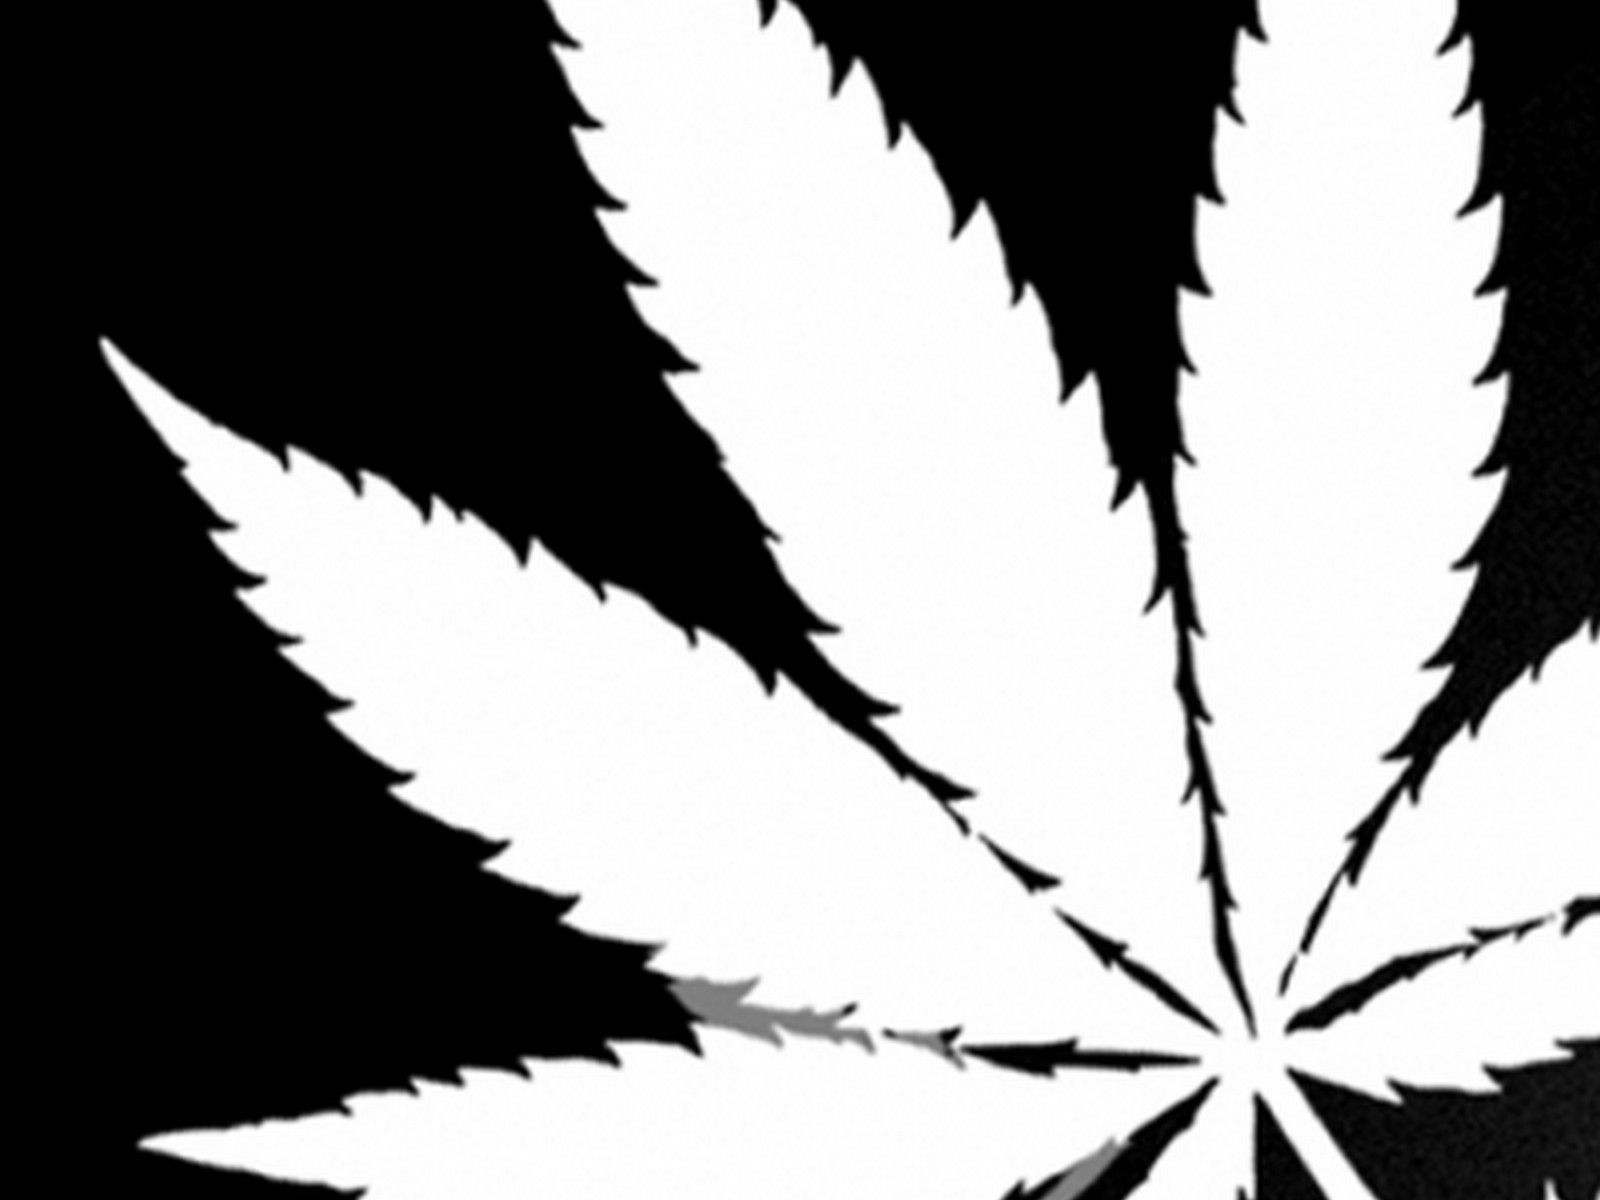 Nice Fat, Big Fn Cannabis Leaf In Black And White - Weed Black And White -  1600x1200 Wallpaper 